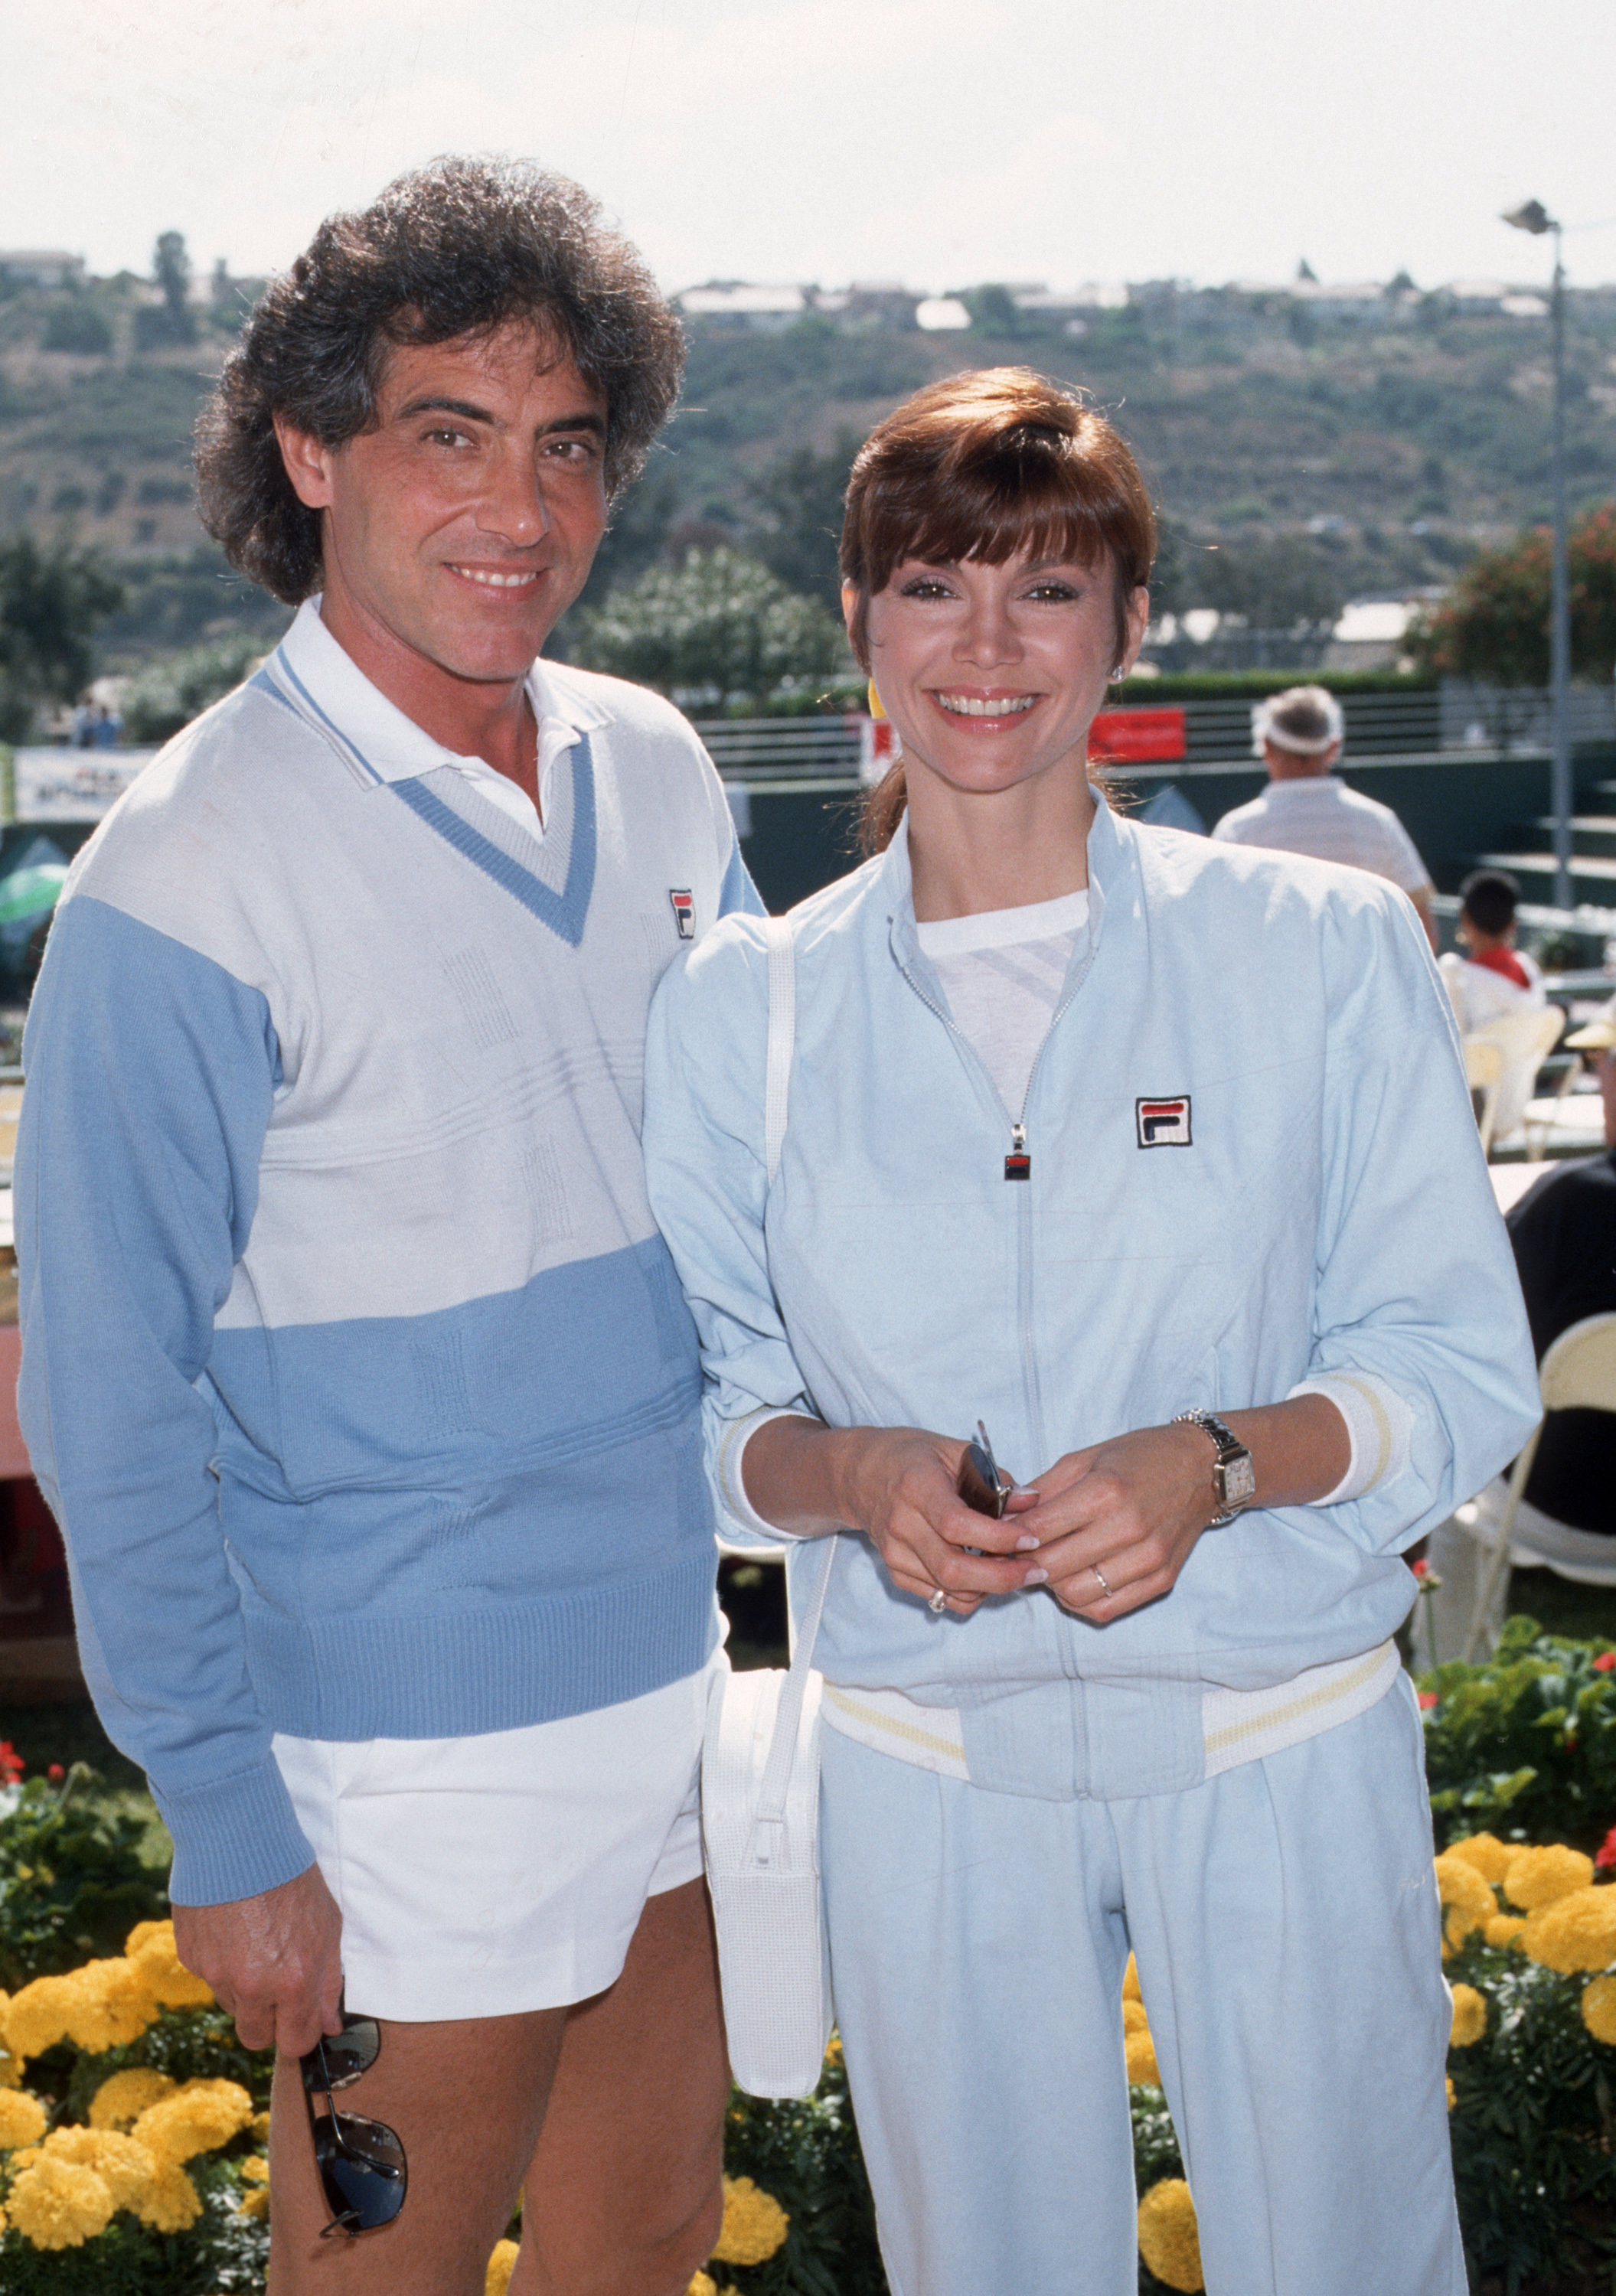 Harry Glassman and Victoria Principal at the Arthritis Foundation Tennis Benefit on October 18, 1986 | Source: Getty Images